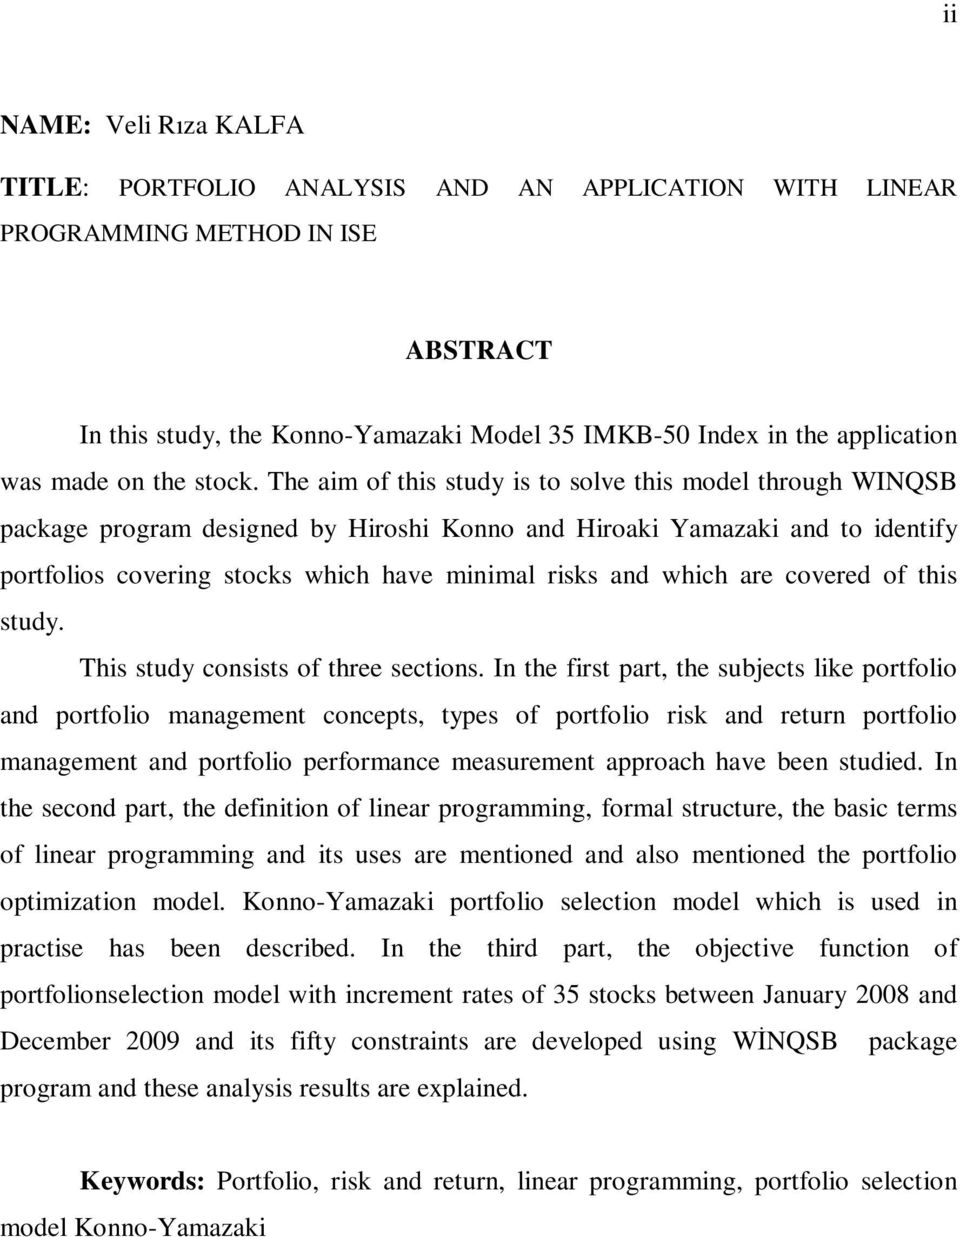 The aim of this study is to solve this model through WINQSB package program designed by Hiroshi Konno and Hiroaki Yamazaki and to identify portfolios covering stocks which have minimal risks and